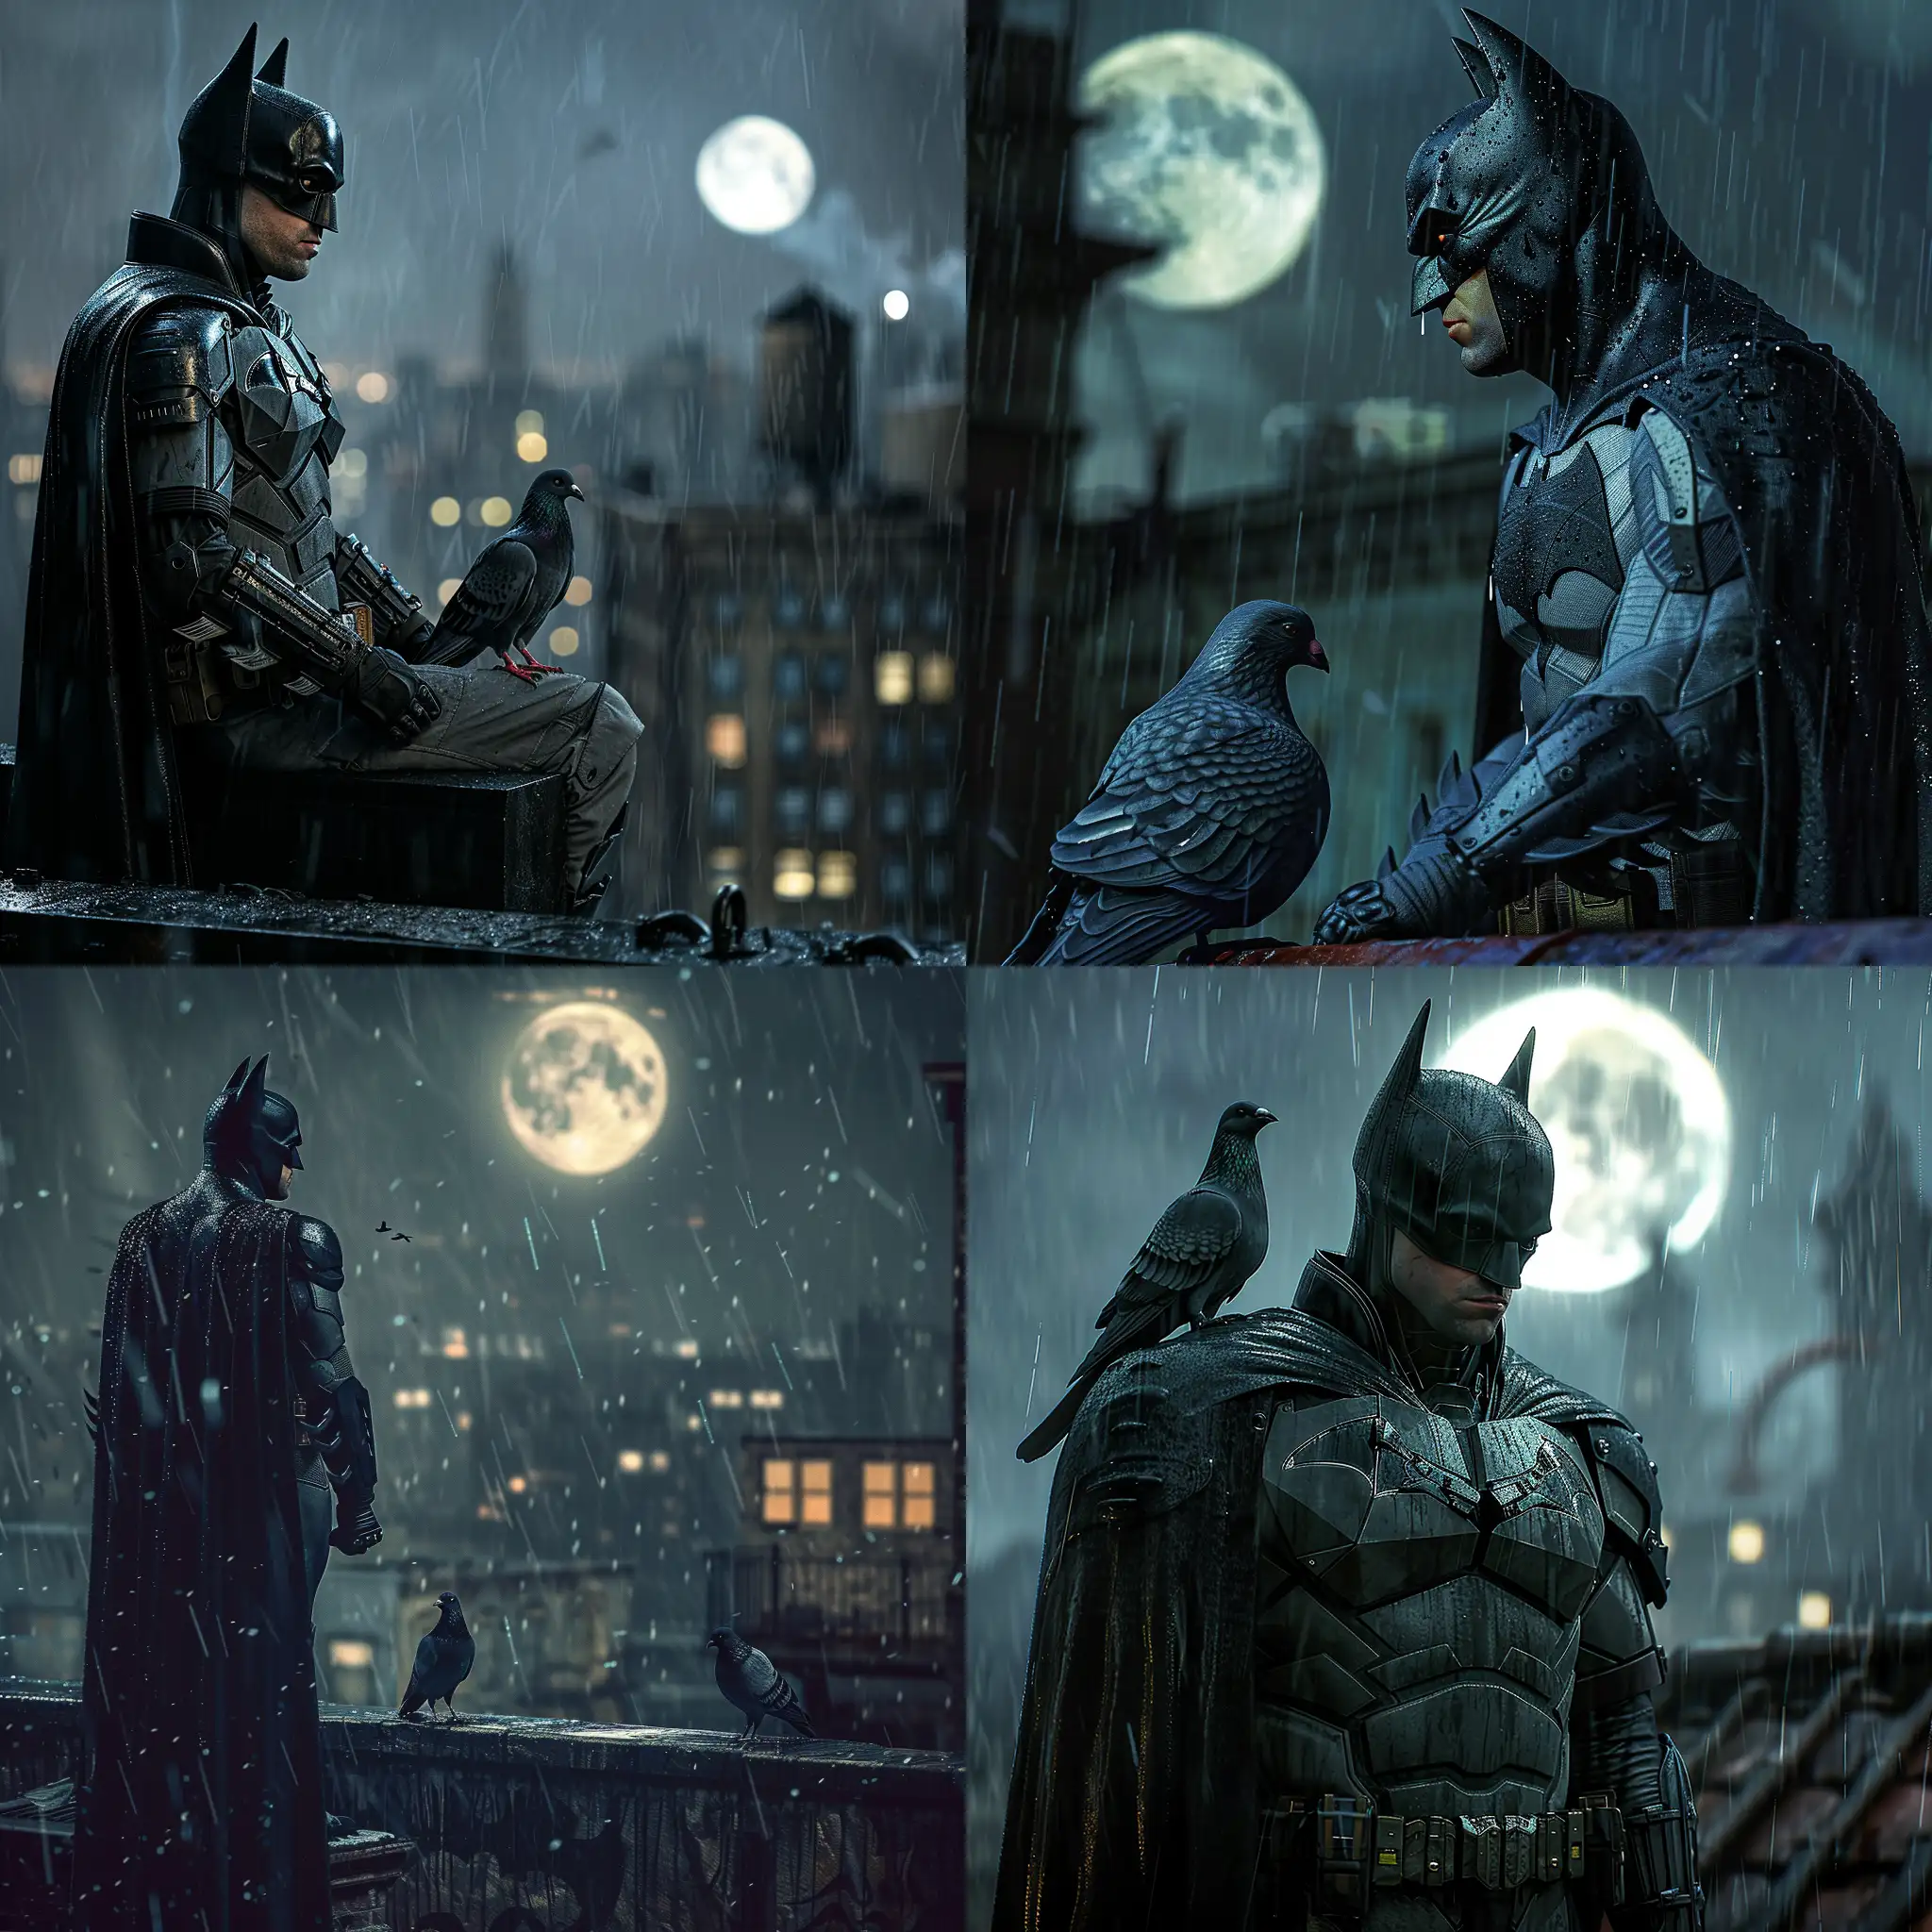 Batman at night in the rain looking heroic on rooftop with pigeon on his shoulder, and a full moon in background, cinematic